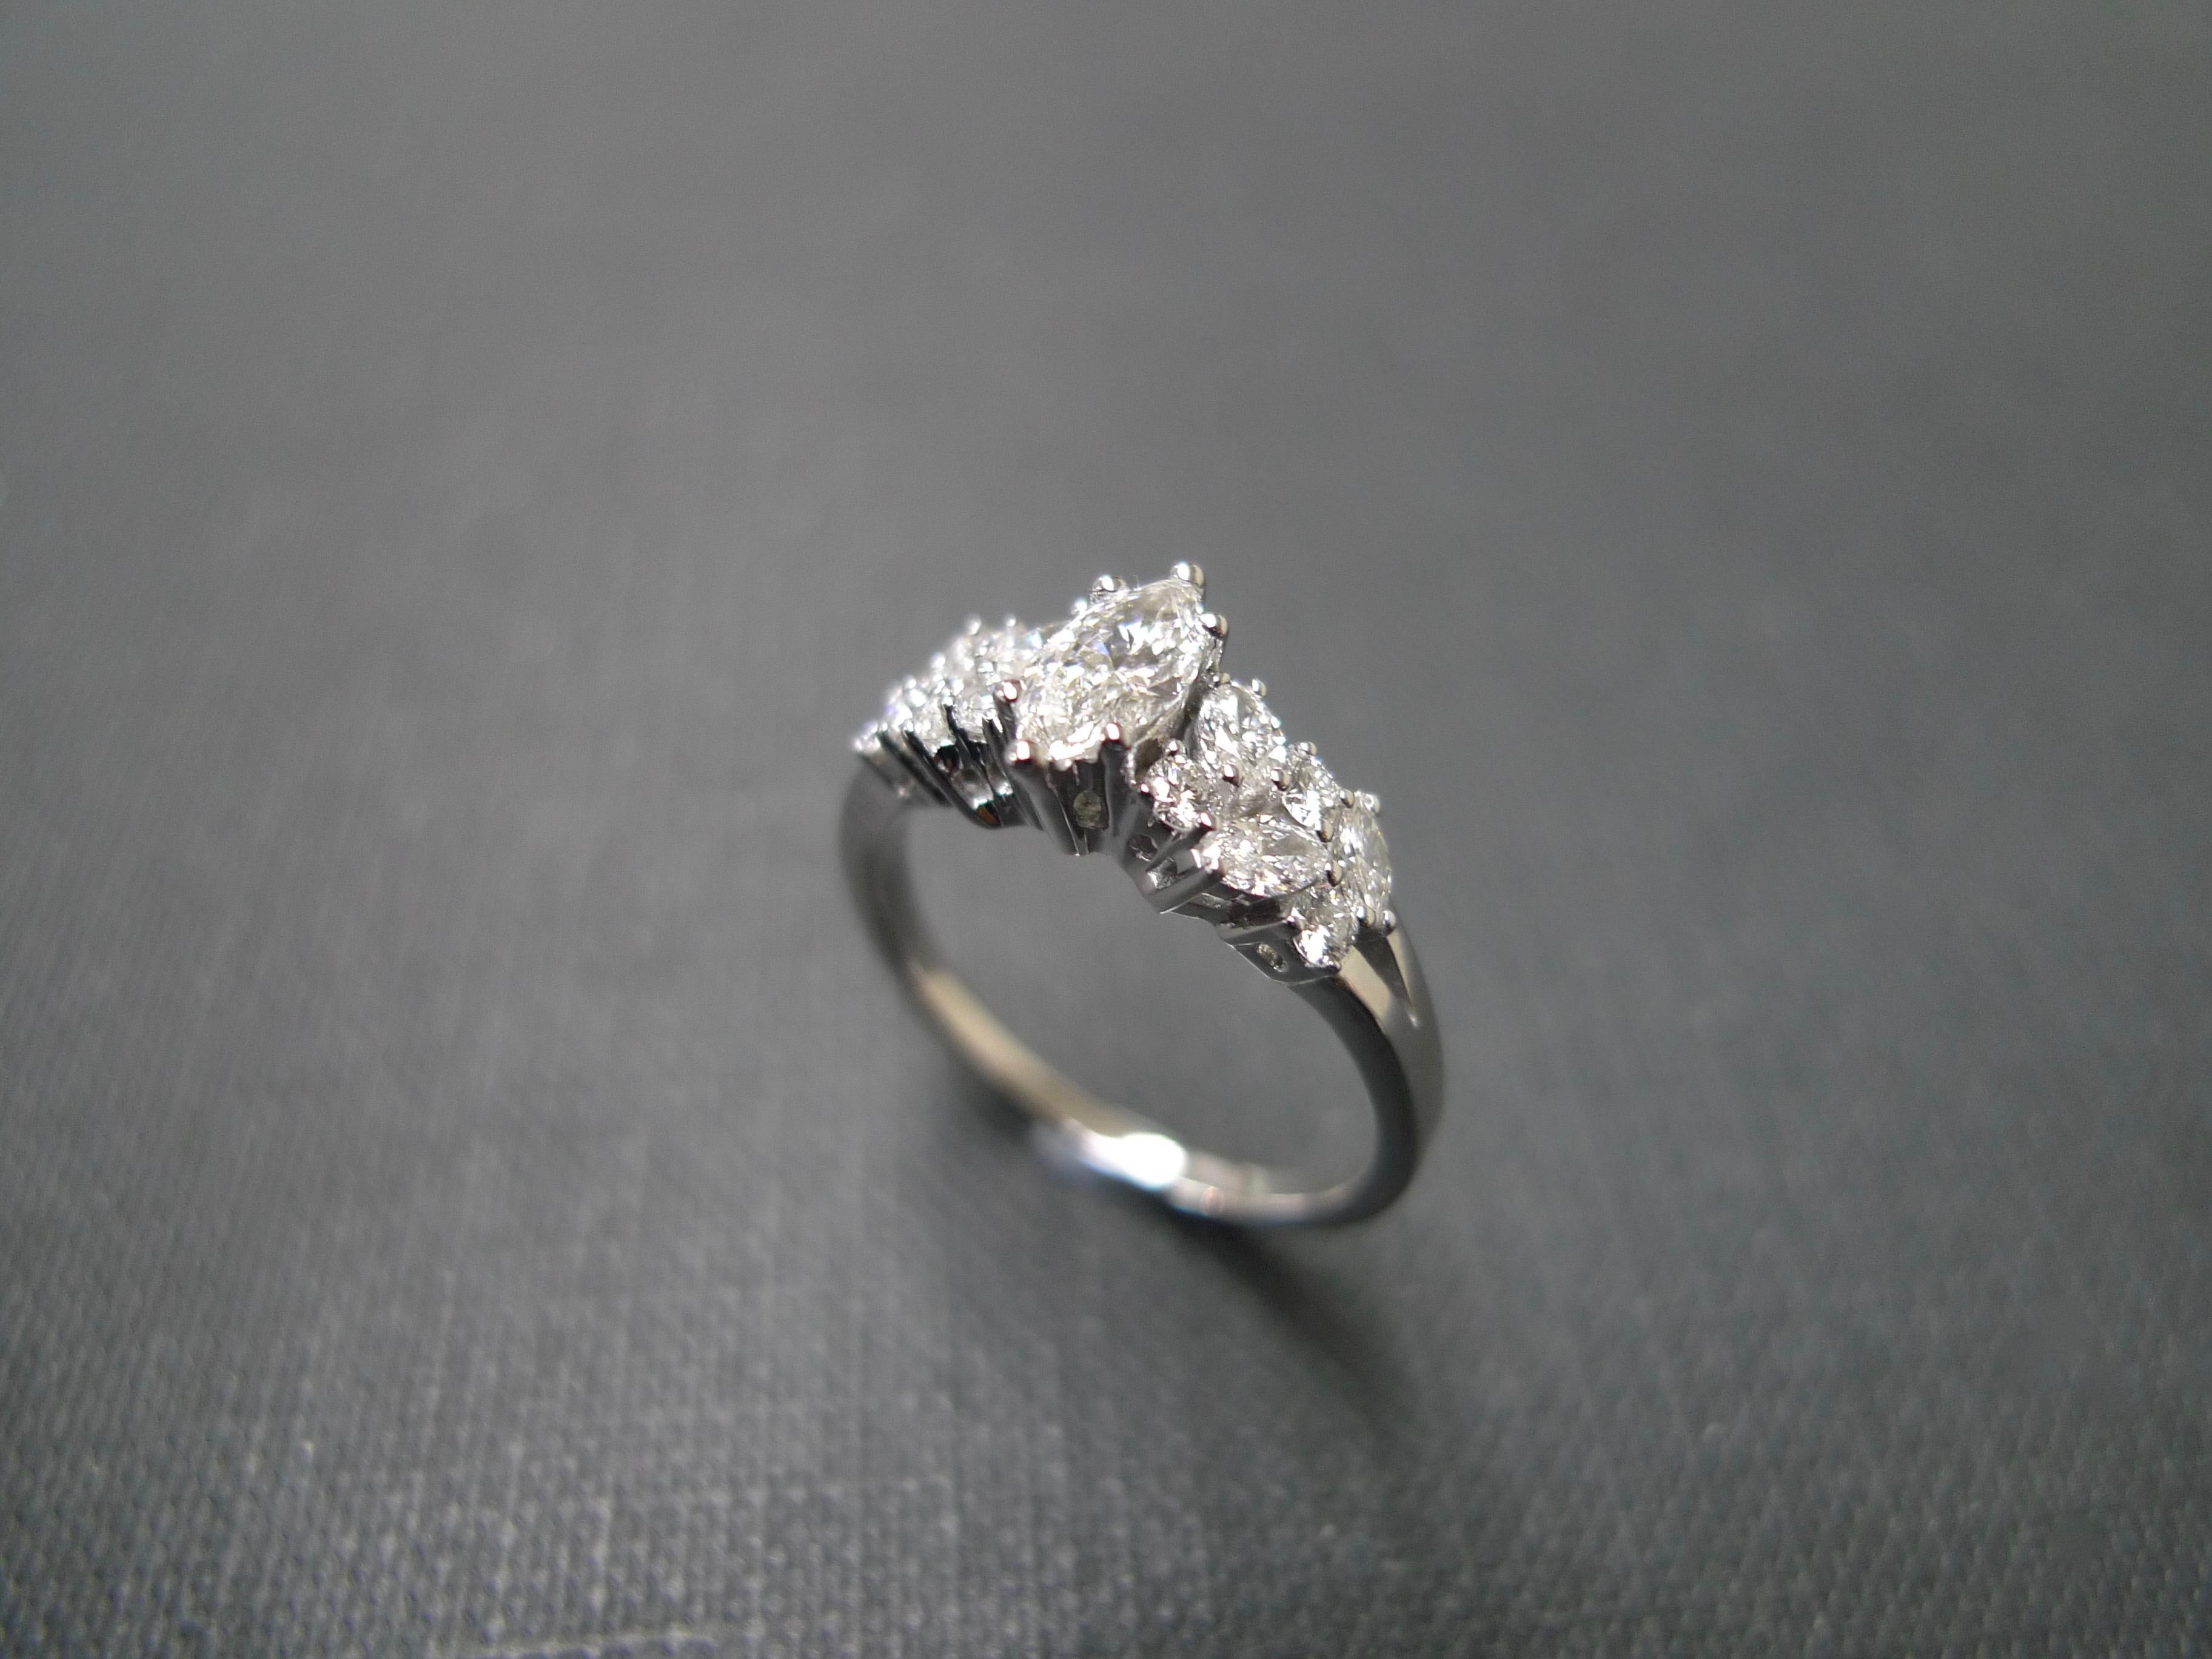 For Sale:  Marquise Cut Diamond Unique Engagement Ring in 18K White Gold with GIA Certified 4